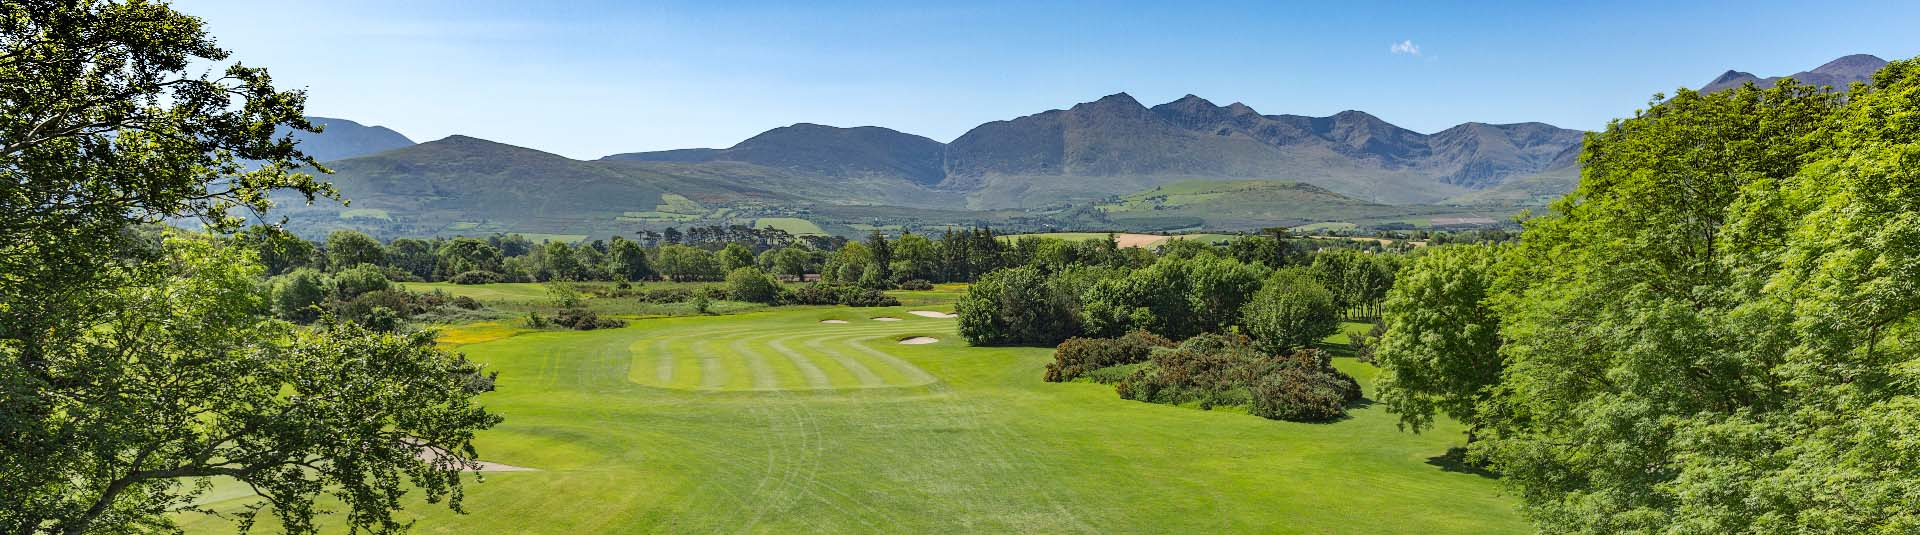 view of golf course and mountains